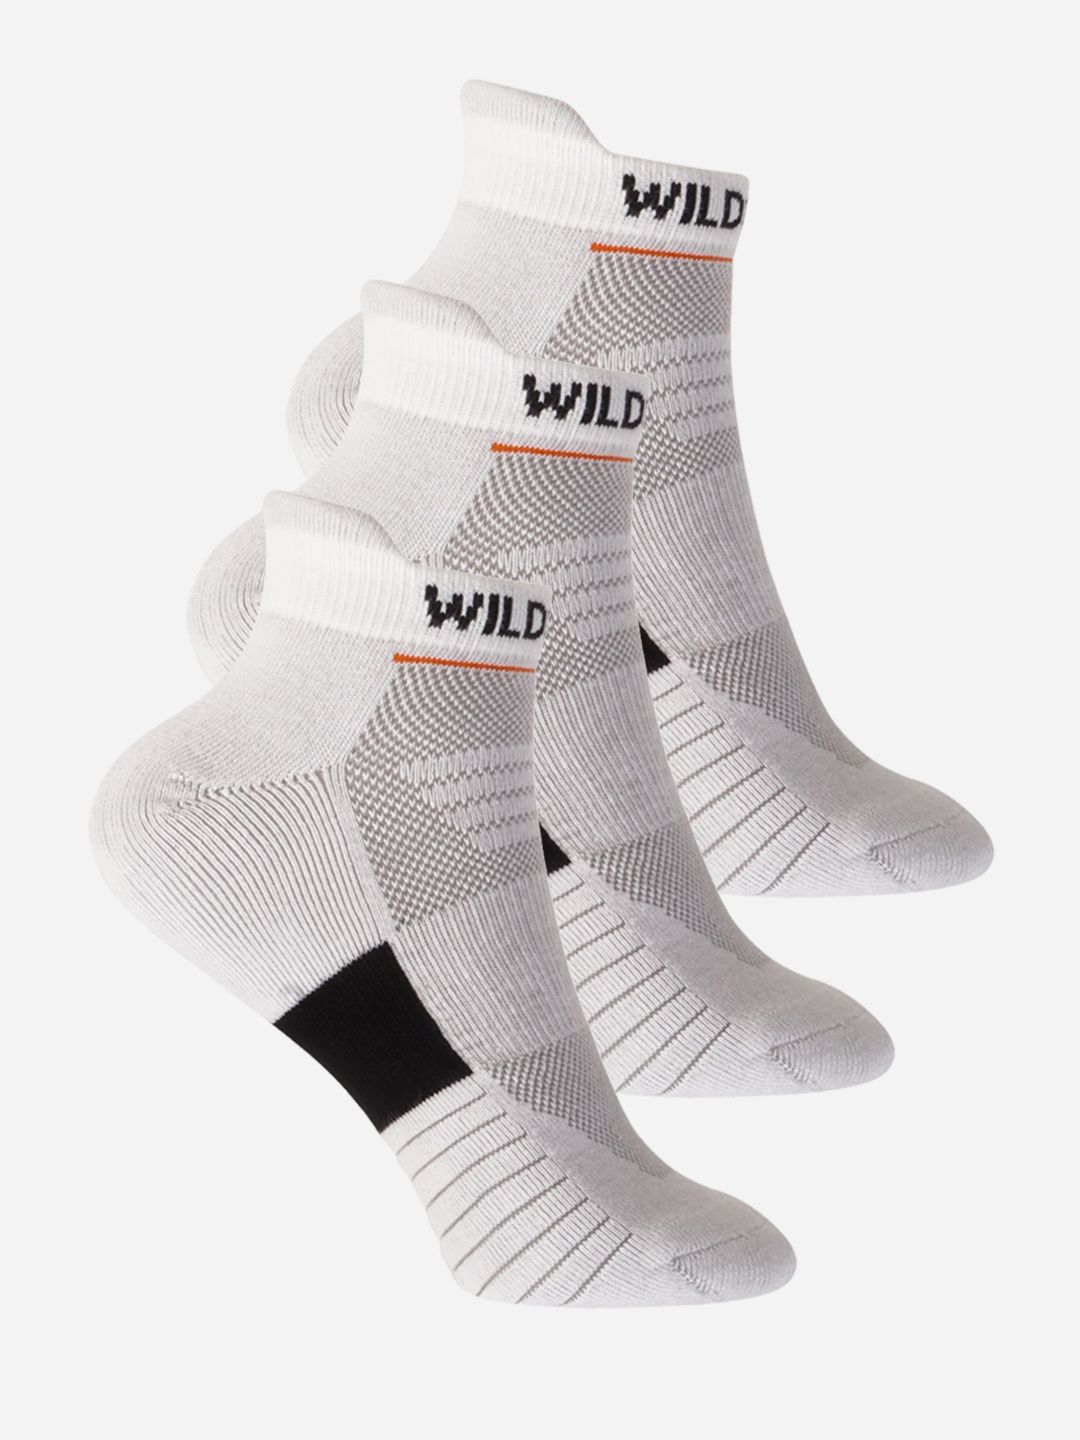 Wildcraft Adults White & Black Pack of 3 Colourblocked Ankle Length Socks Price in India